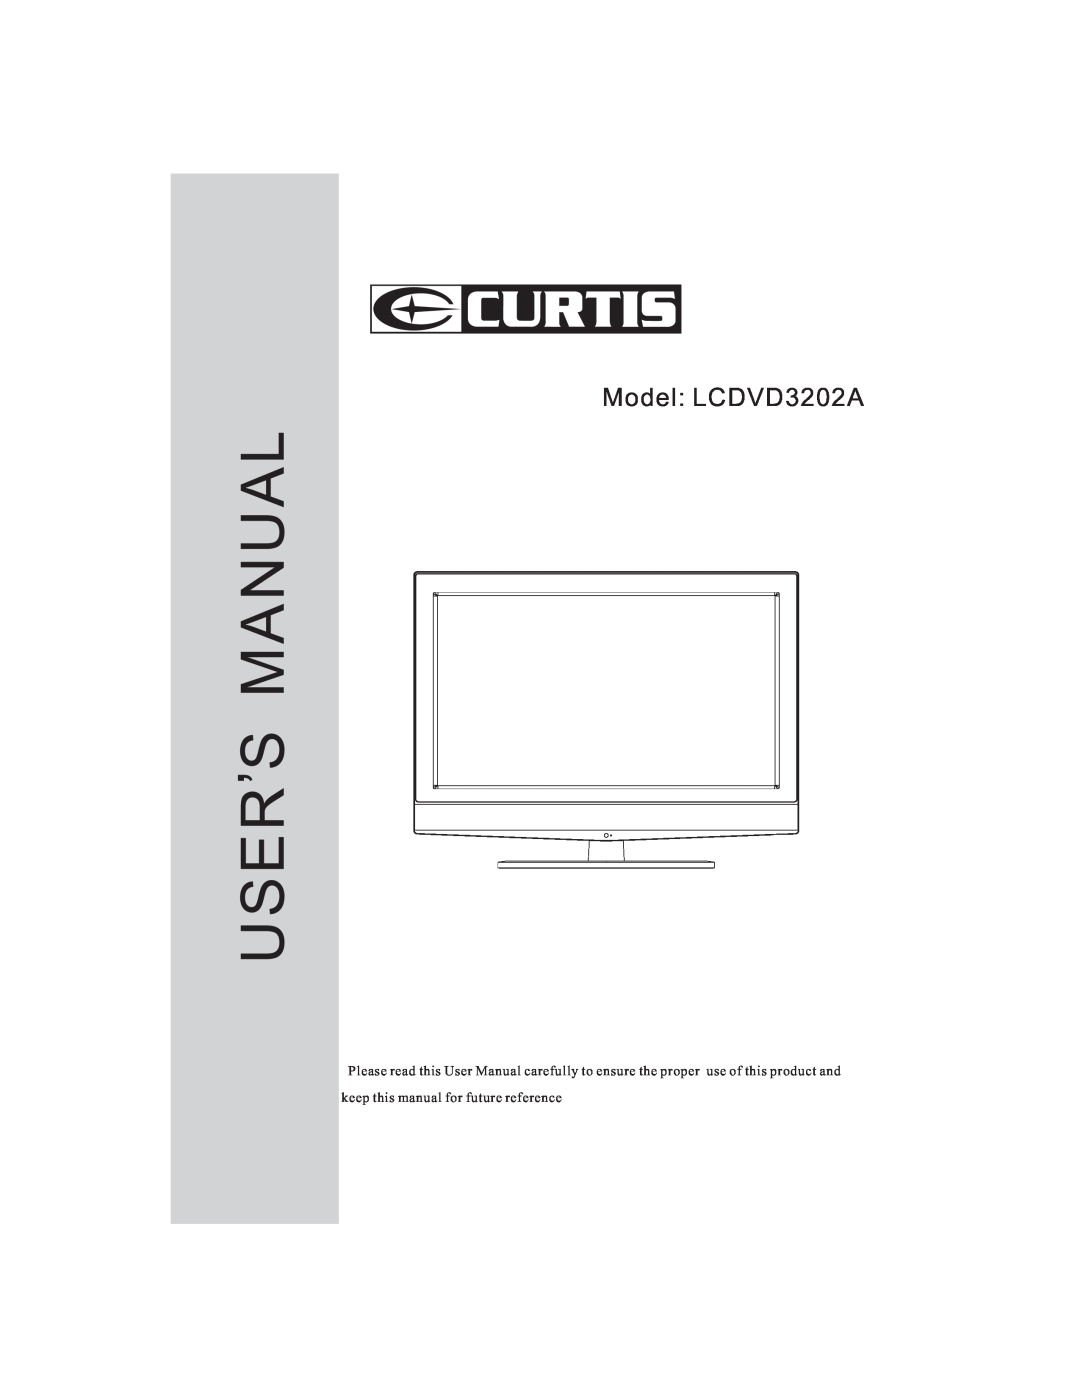 Curtis user manual User S Manual, Model LCDVD3202A, keep this manual for future reference 